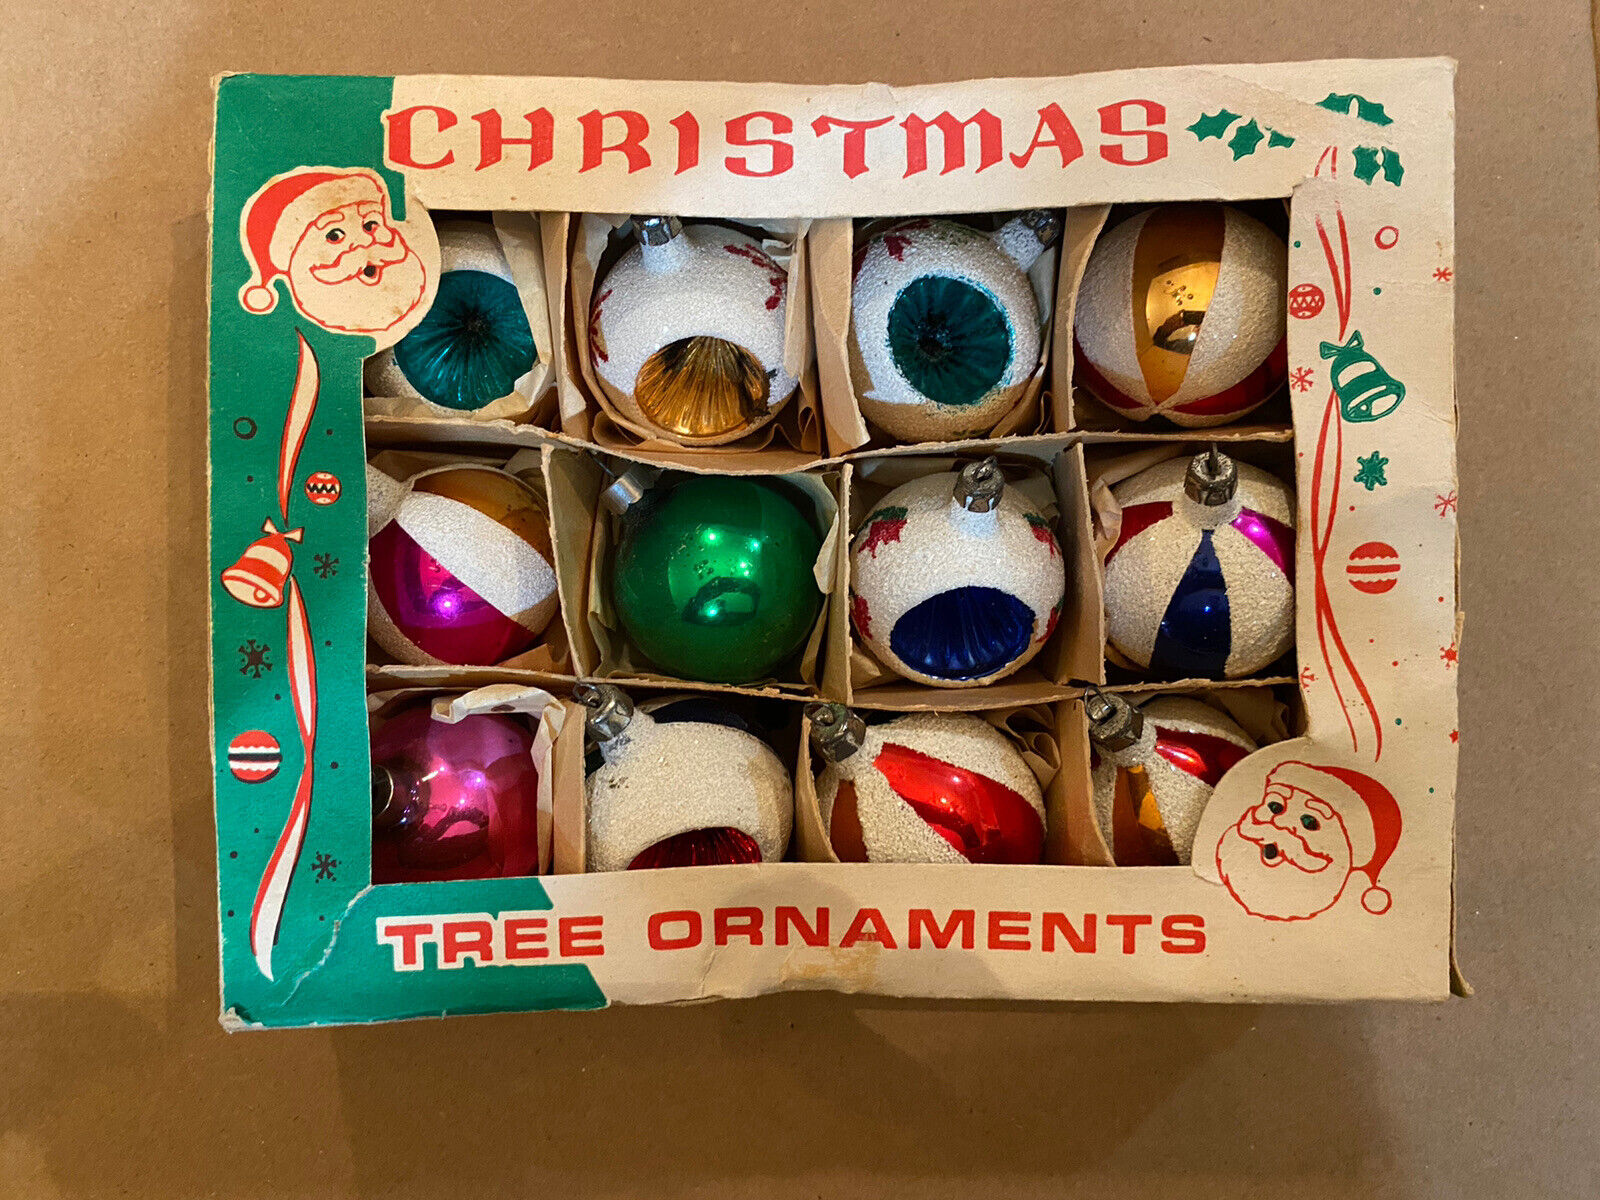 ANTIQUE CHRISTMAS ORNAMENTS WITH SNOW ONE DOZEN 1940’s/50’s RARE WITH BOX NOS